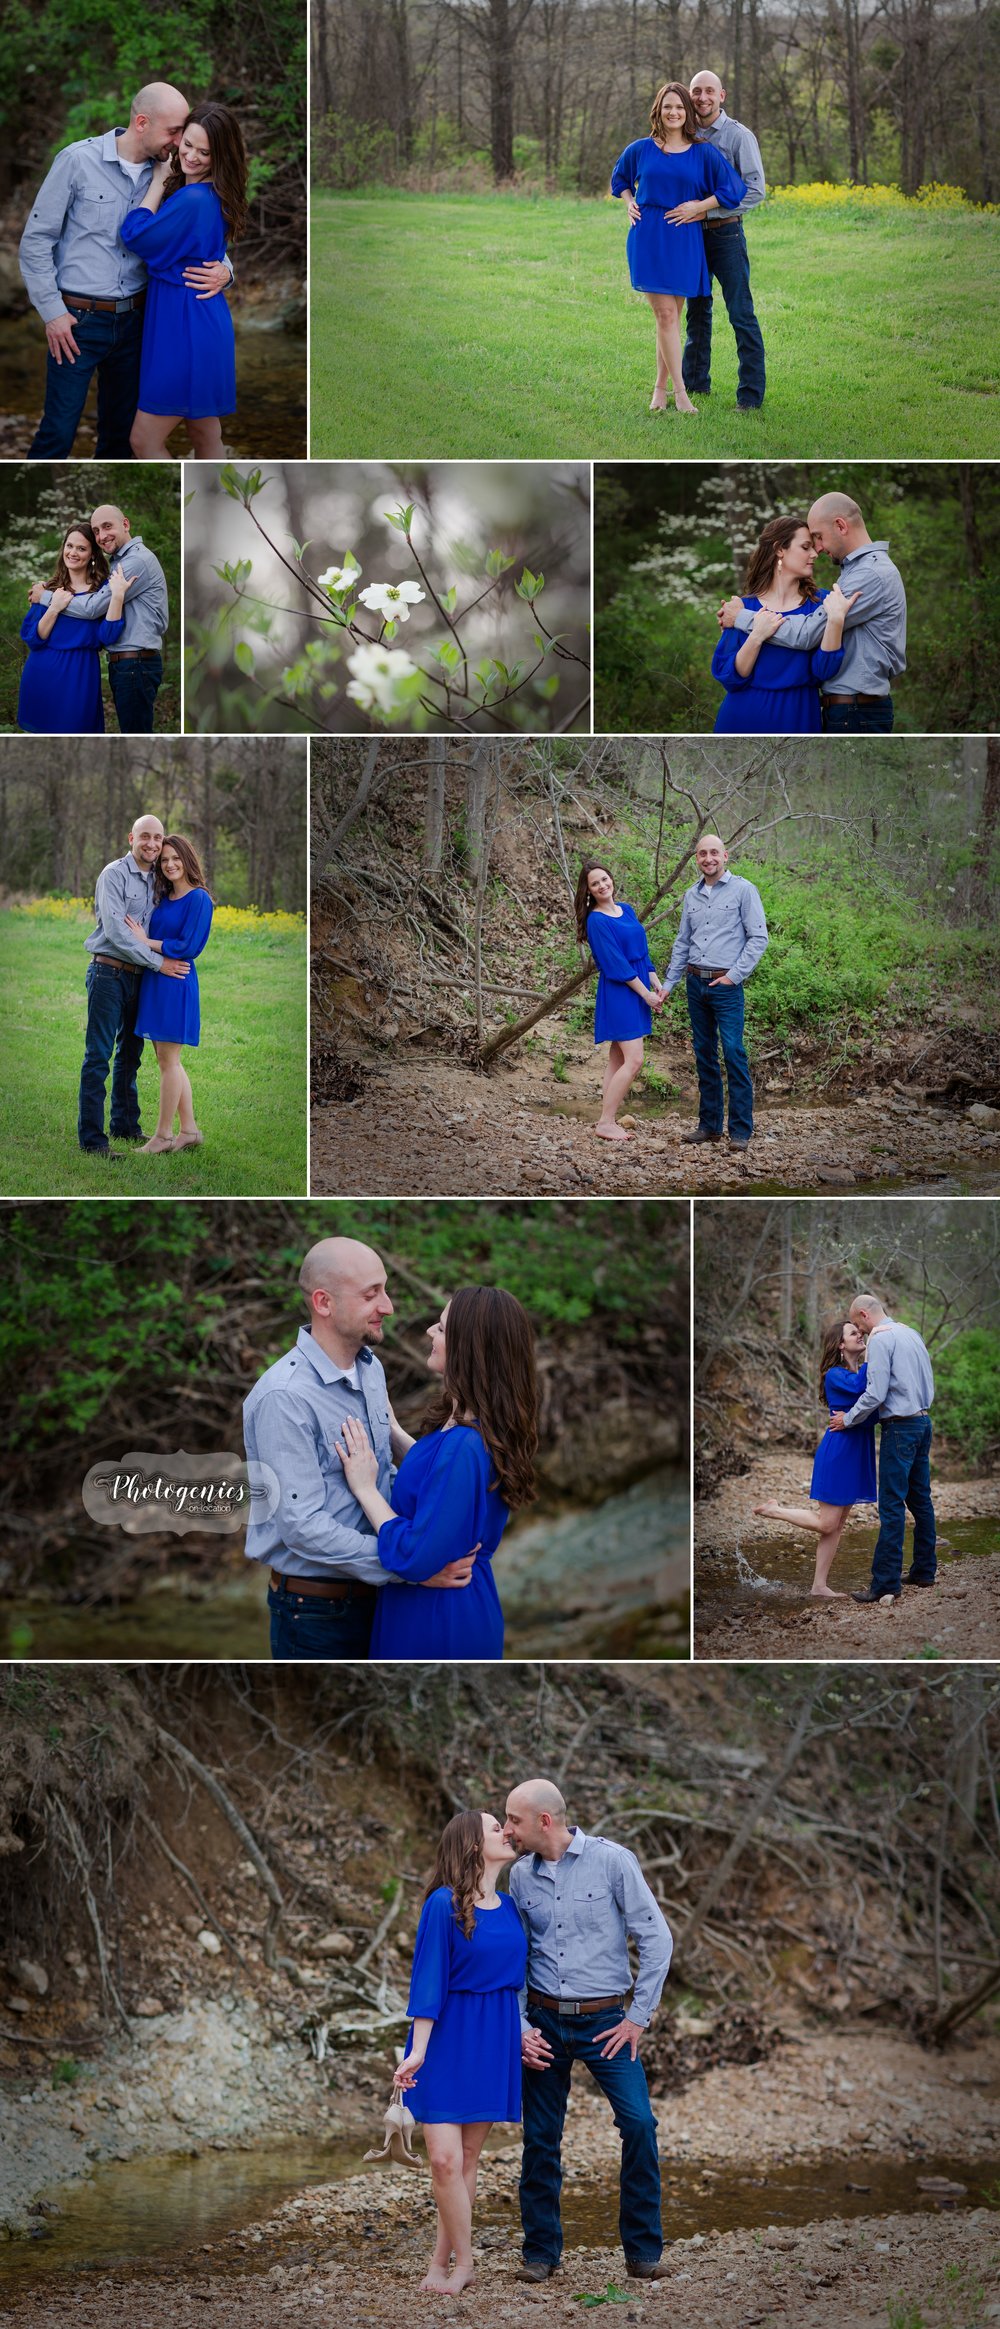  engagement_session_spring_country_creek_water_poses_evening_light_lake_sunset_ideas_simple_variety_unique 